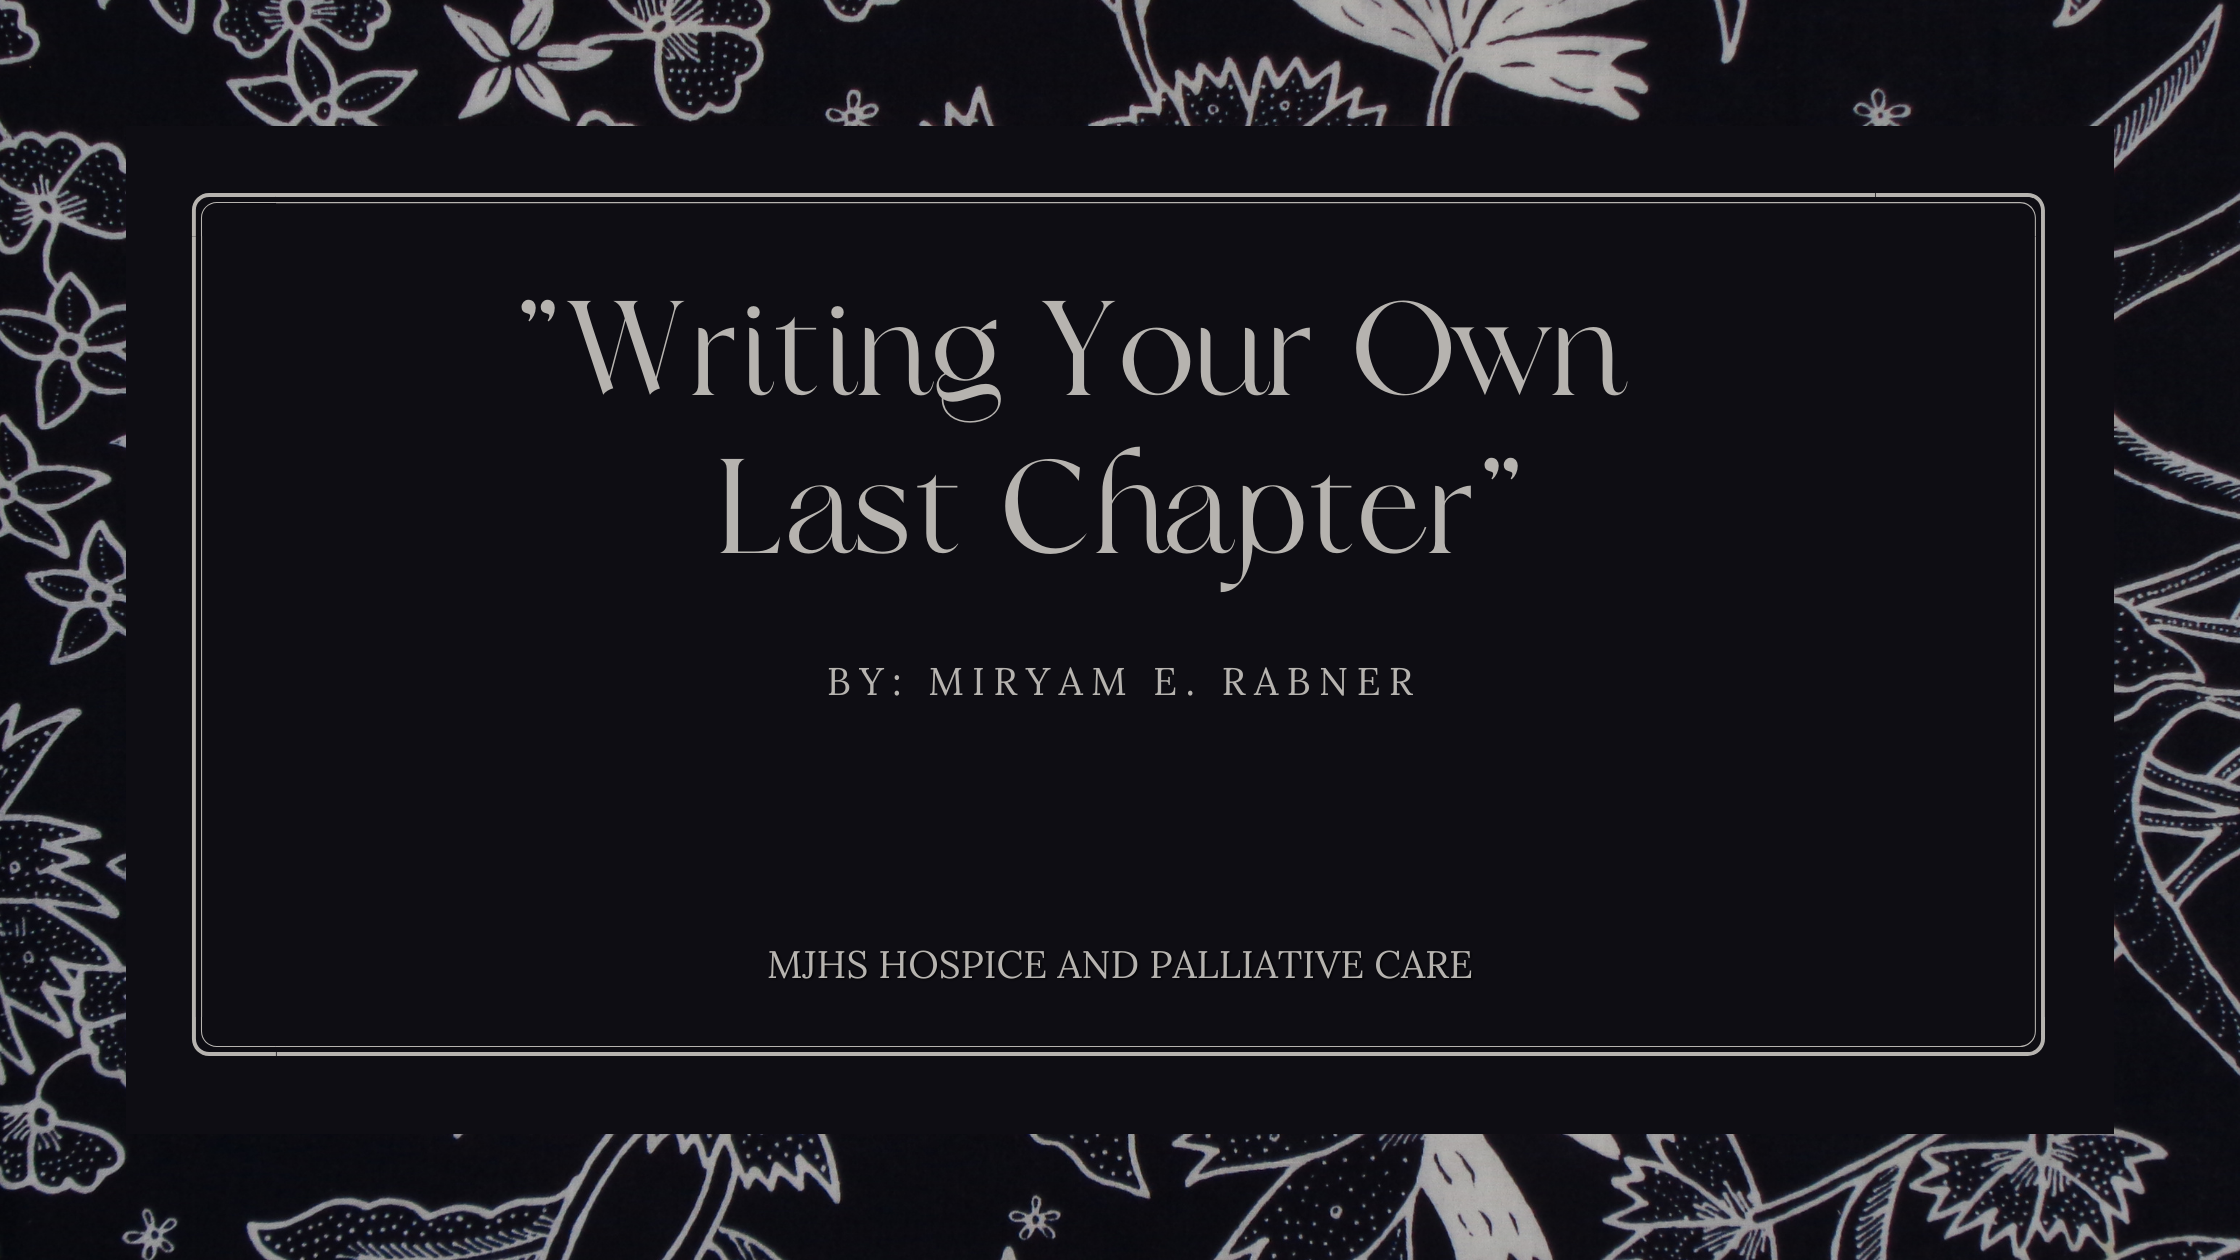 Writing Your Own Last Chapter  by Miryam Rabner